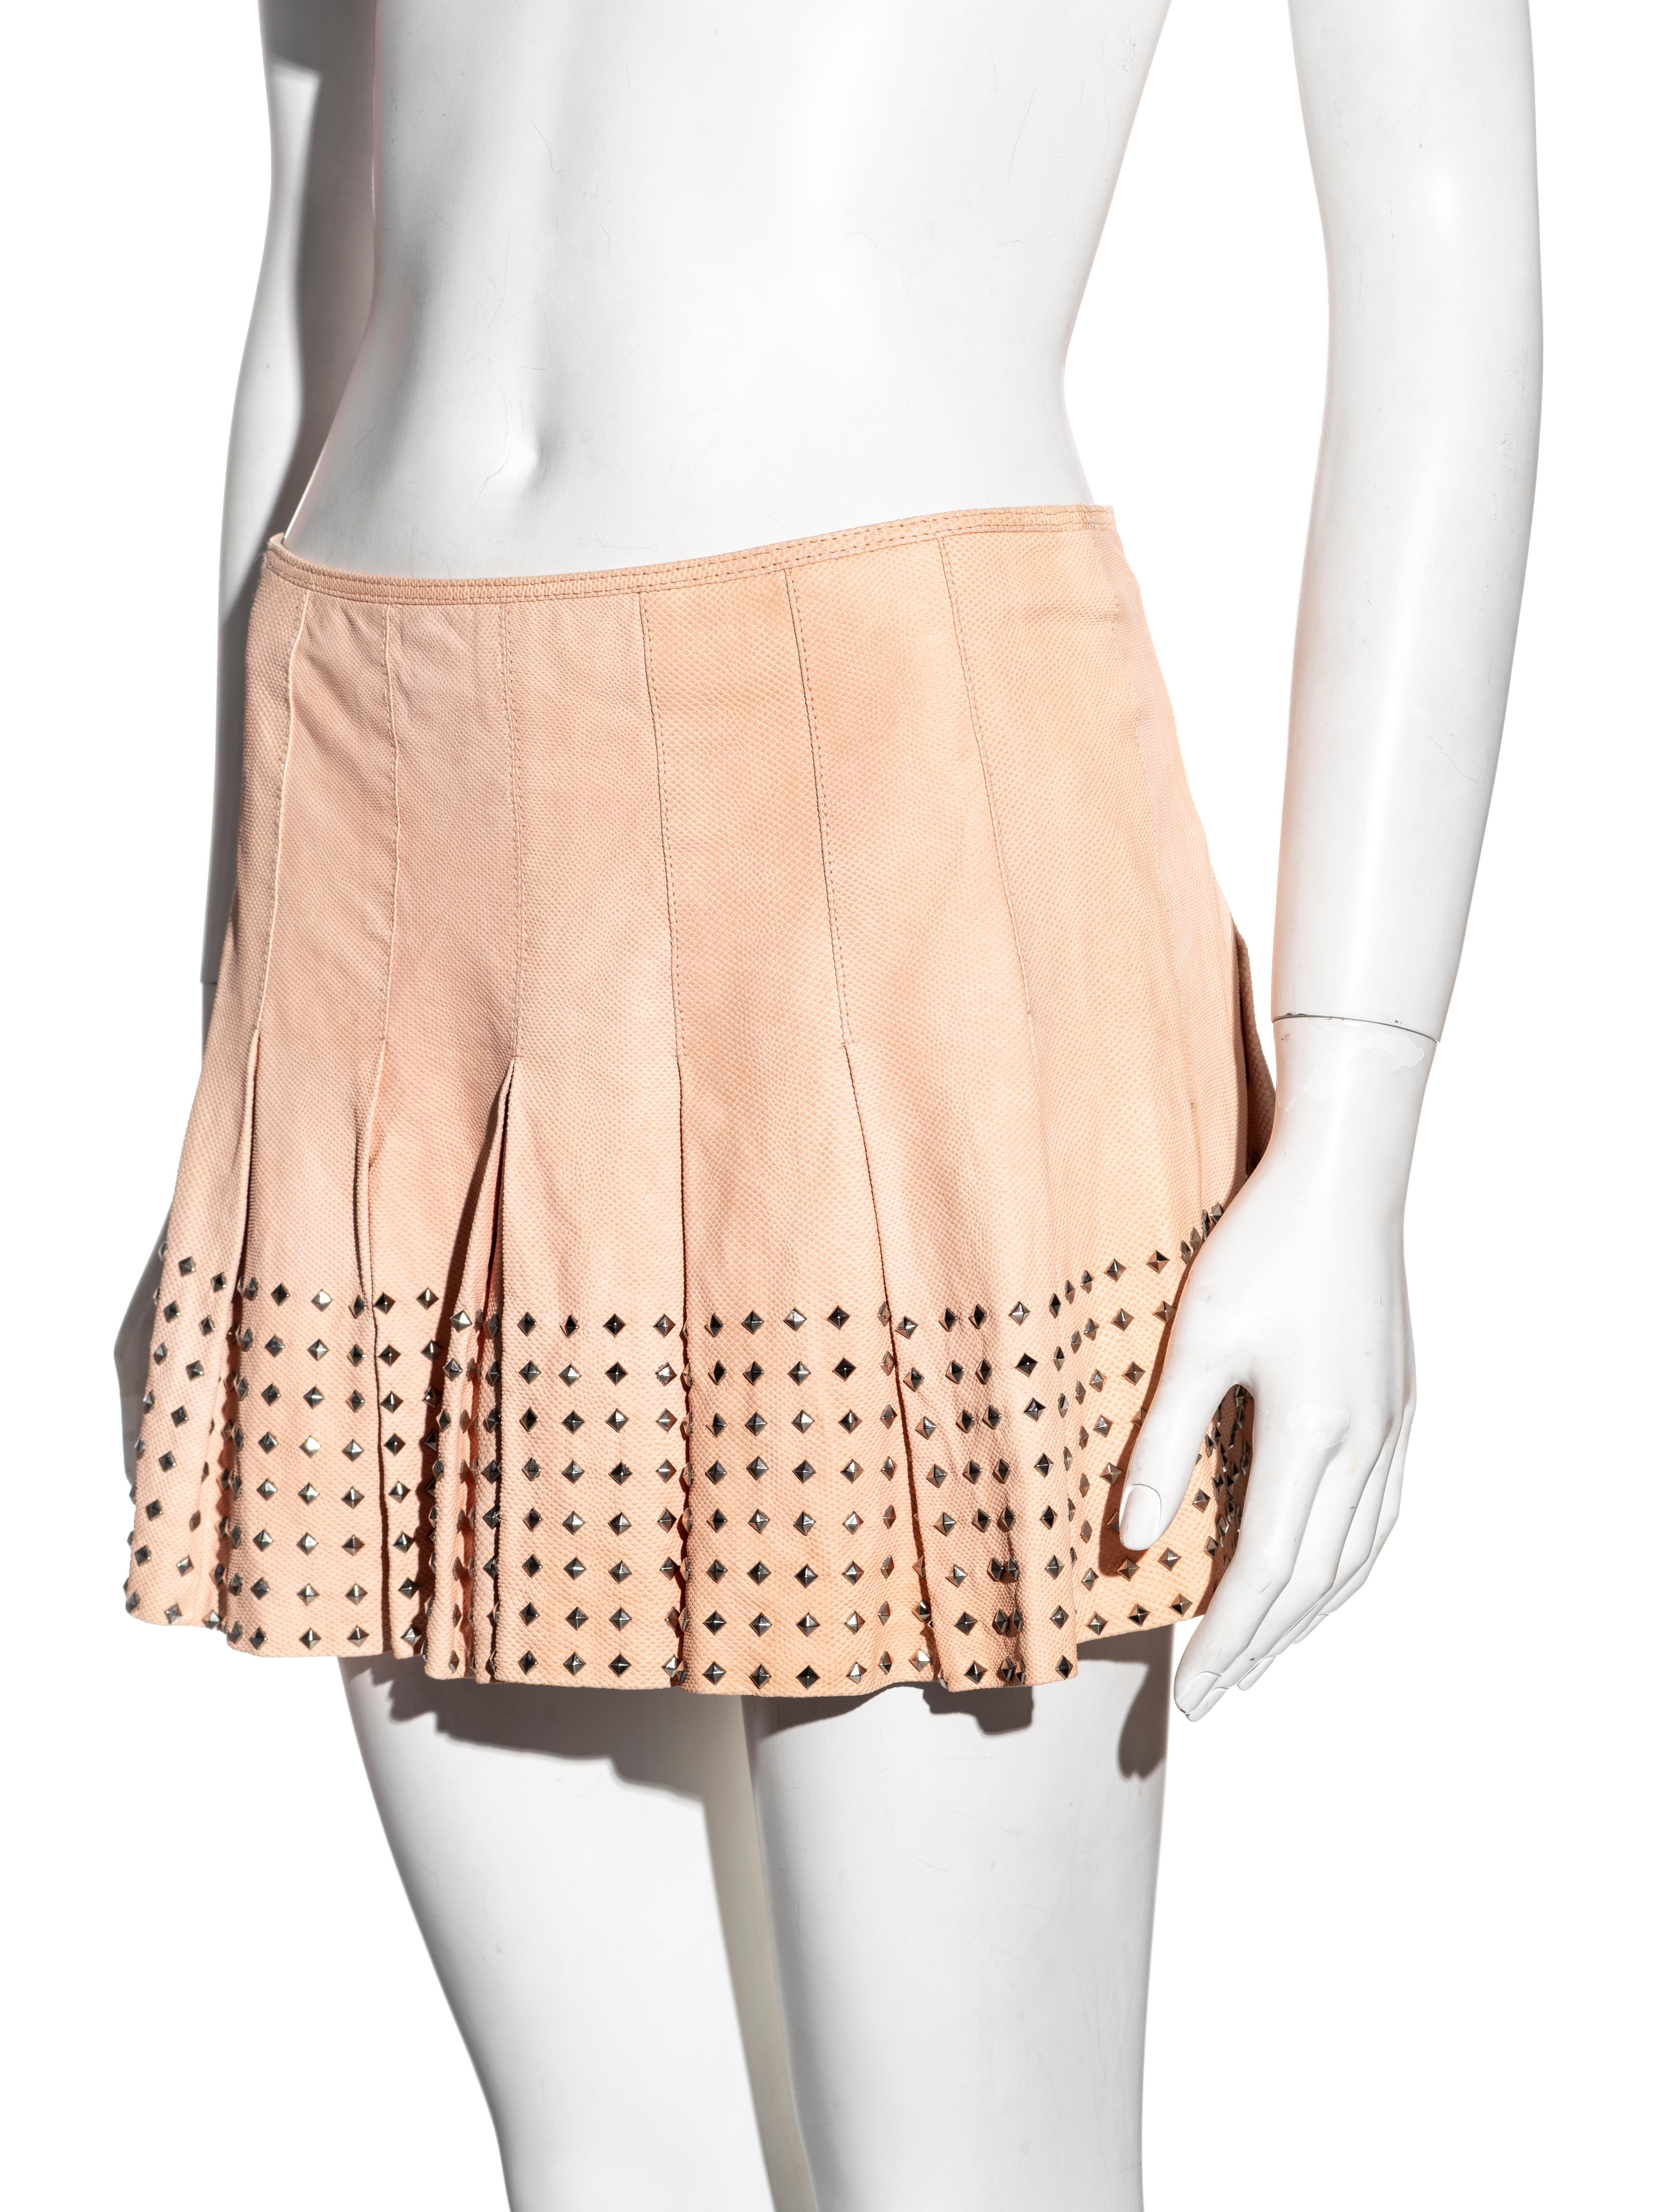 Orange Gianni Versace pink pleated leather mini skirt, ss 2003 For Sale